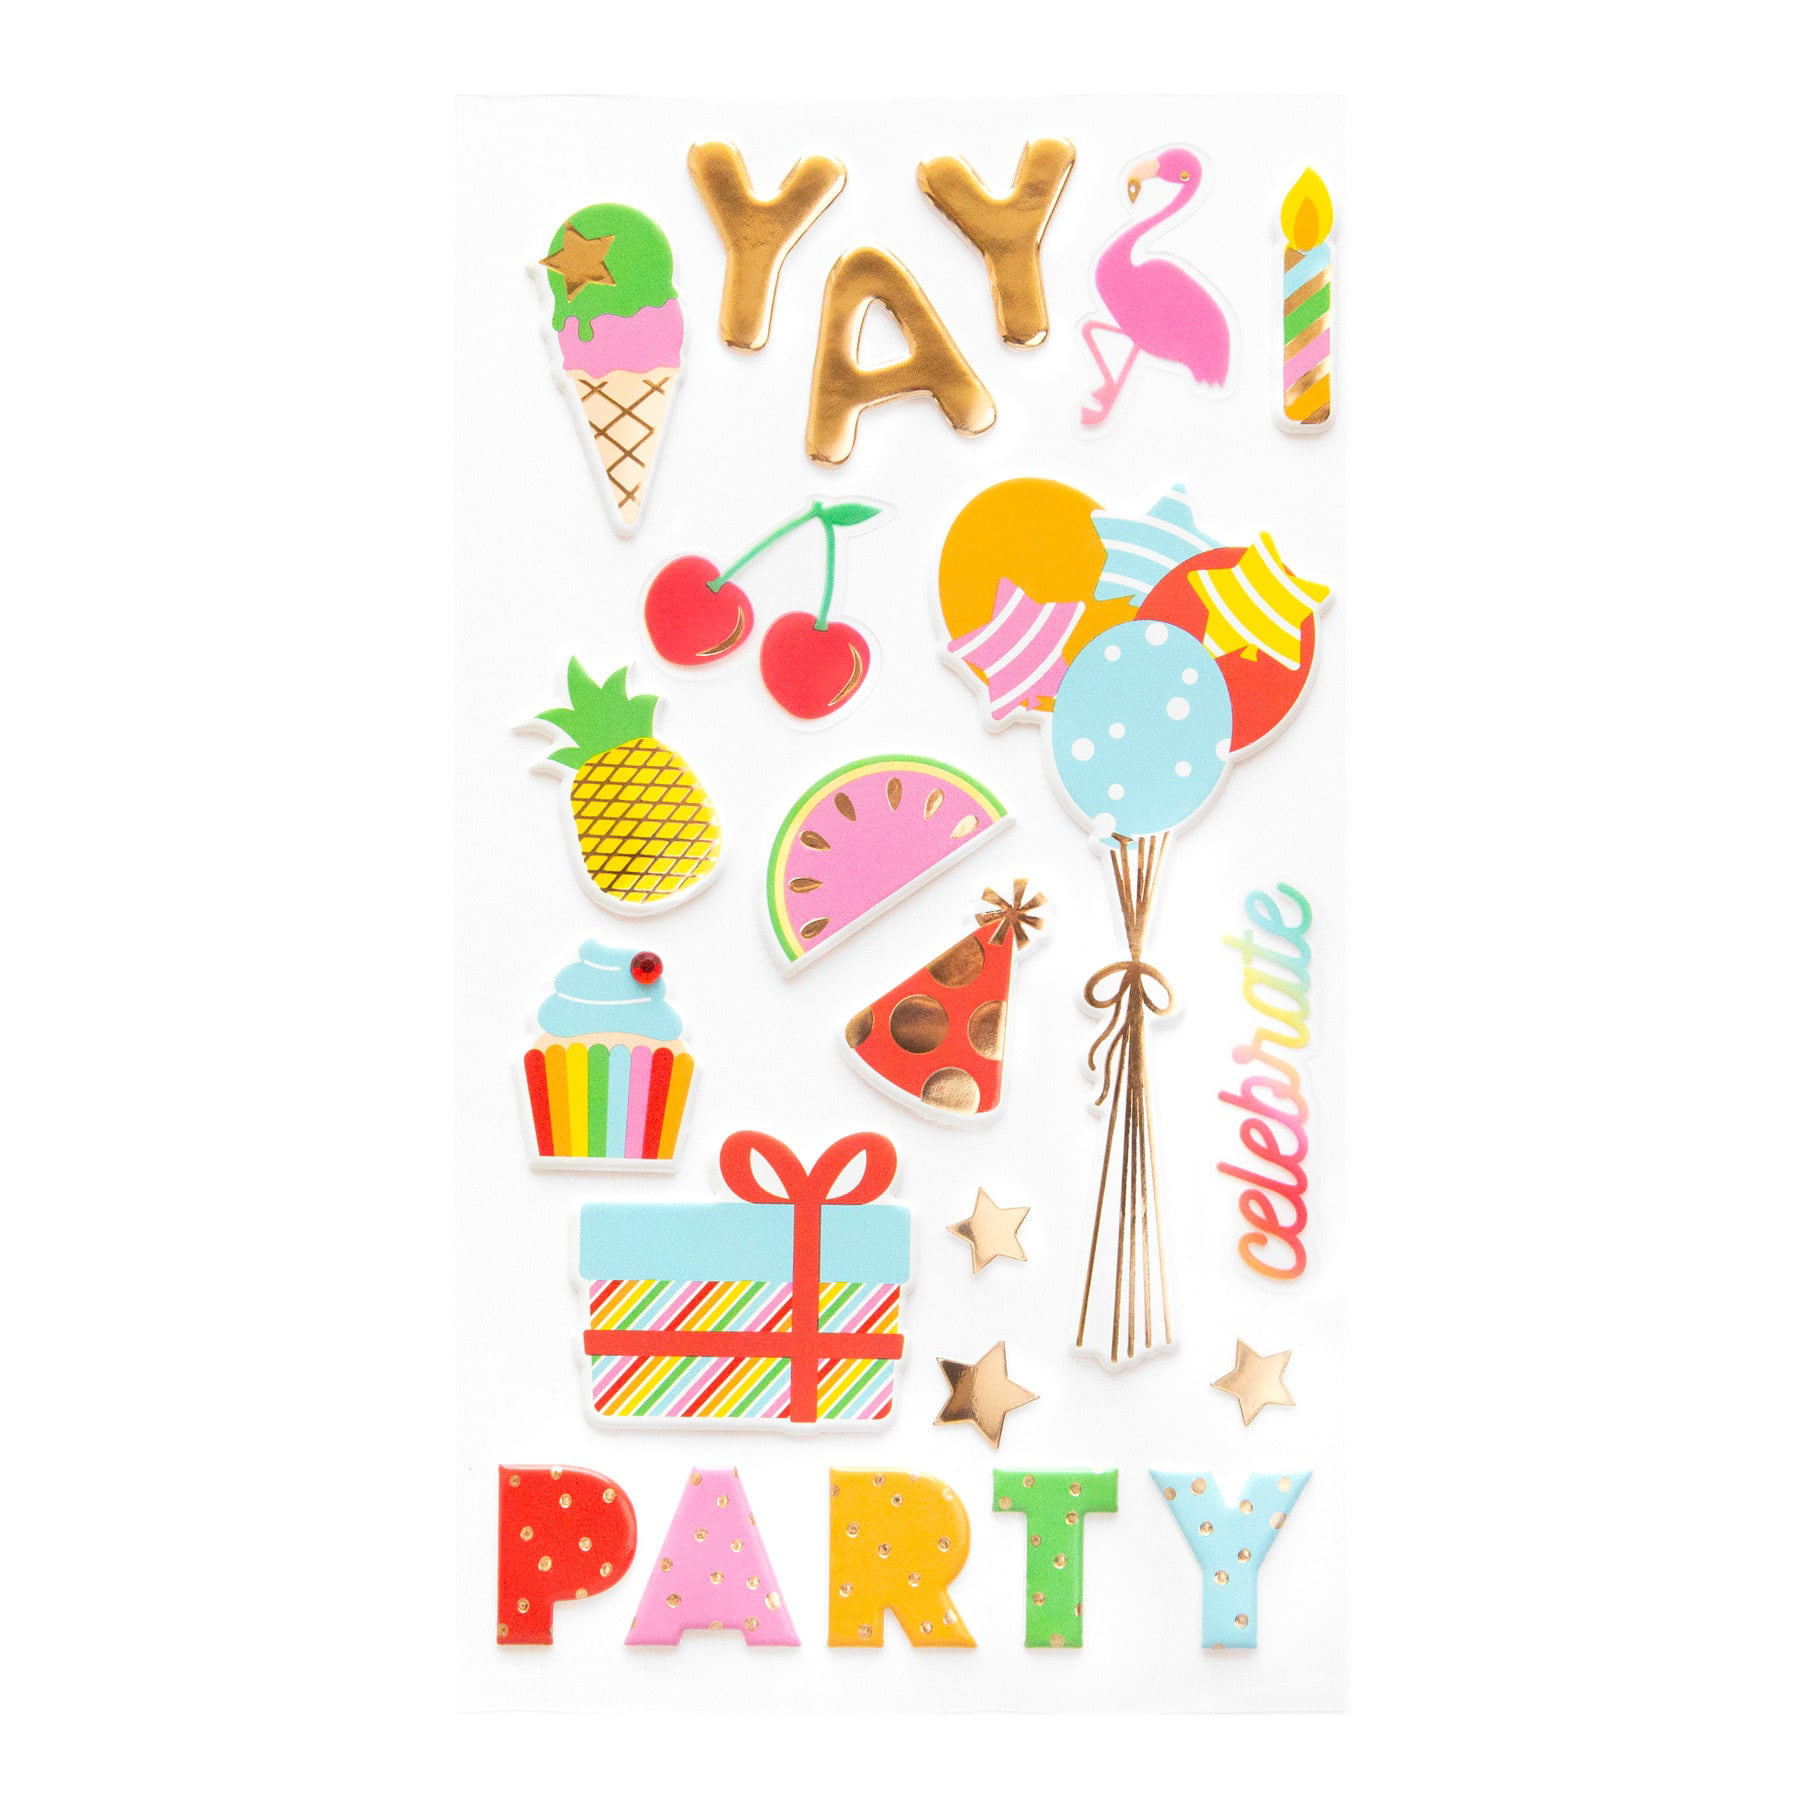 Tangnade 53pcs Happy Birthday Stickers Birthday Party Stickers for Kids Adults Party School Supplies Calendar Birthday Card, Size: One Size